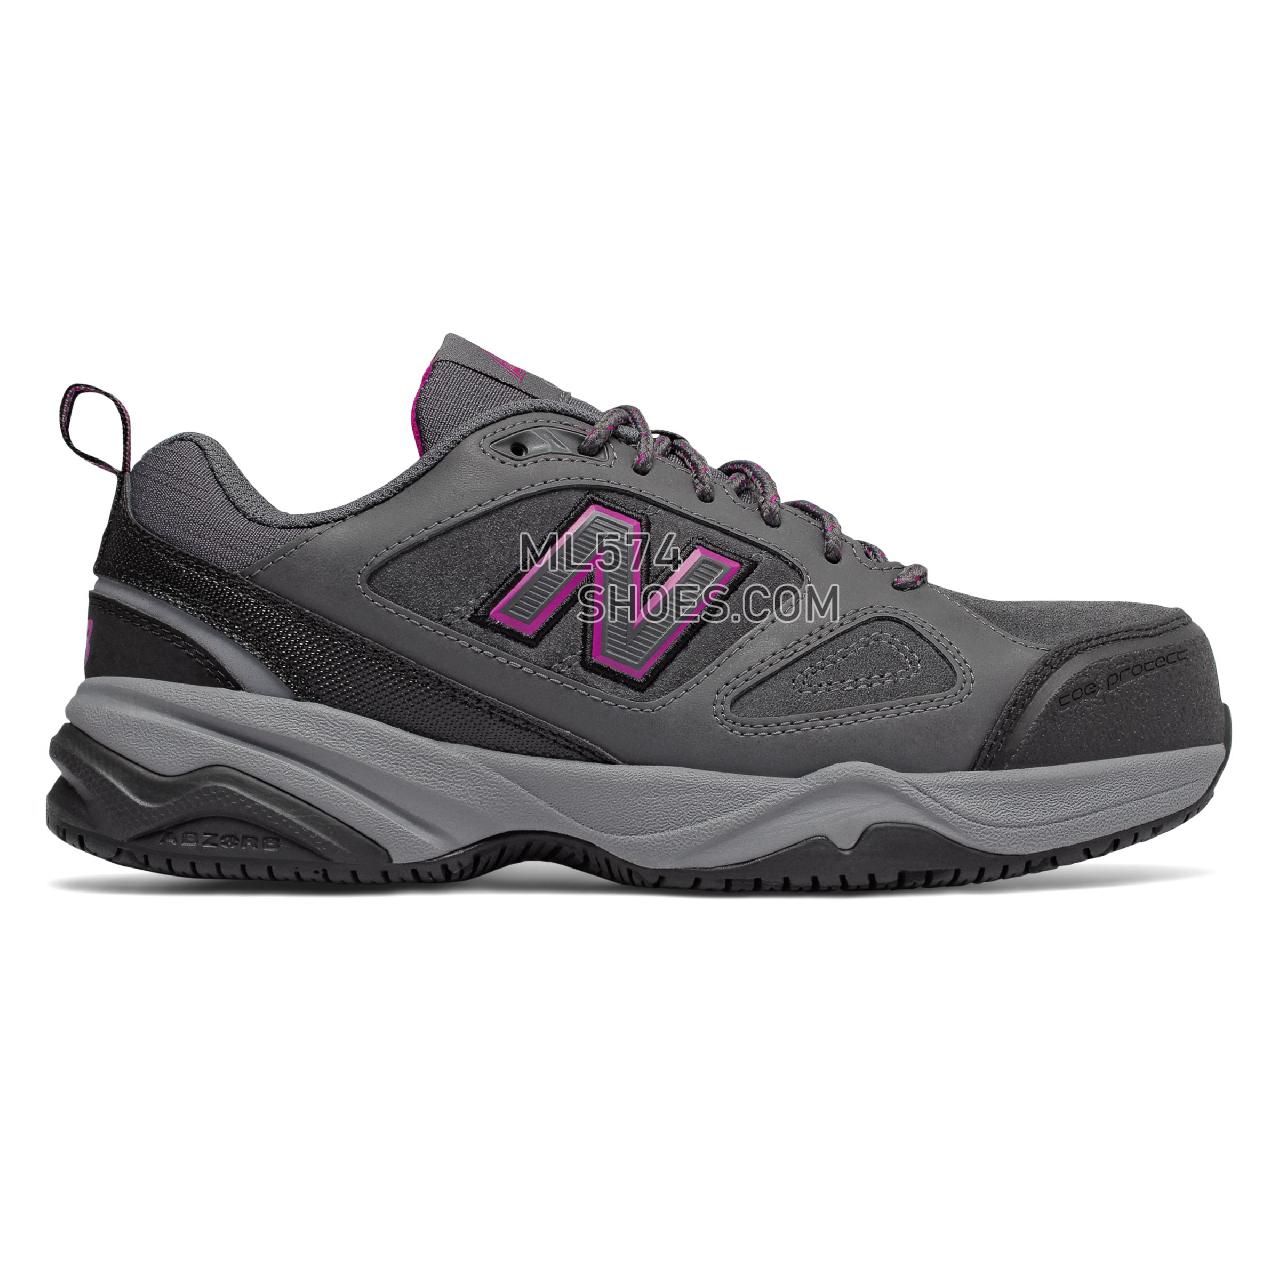 New Balance Steel Toe 627v2 Leather - Women's 627 - Industrial Grey with Pink - WID627P2